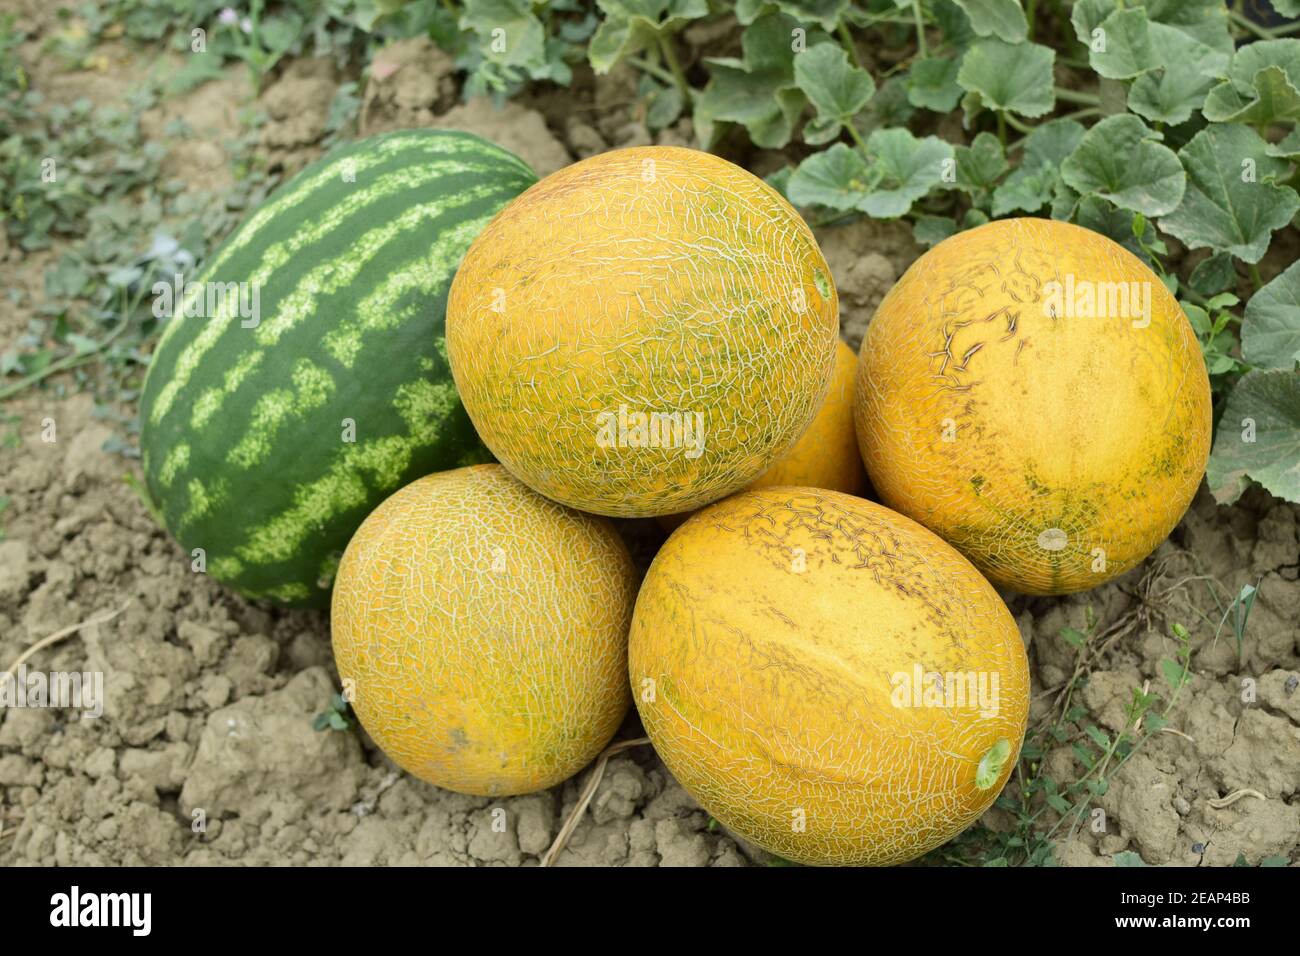 Ripe melon and watermelon the new harvest. Stock Photo